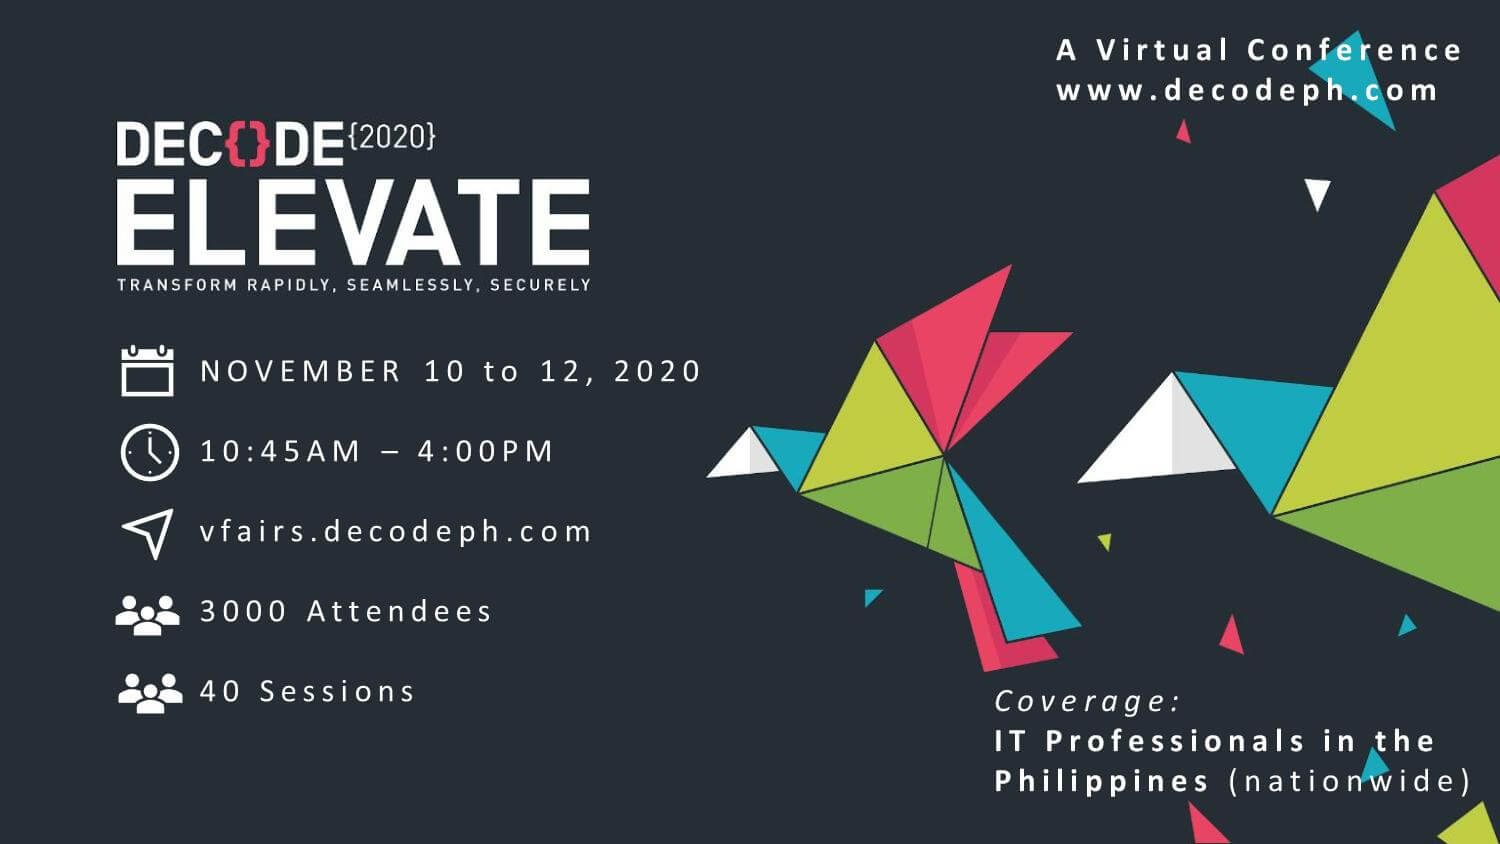 DECODE 2020 to gather IT professionals, tech experts in 3-day virtual conference